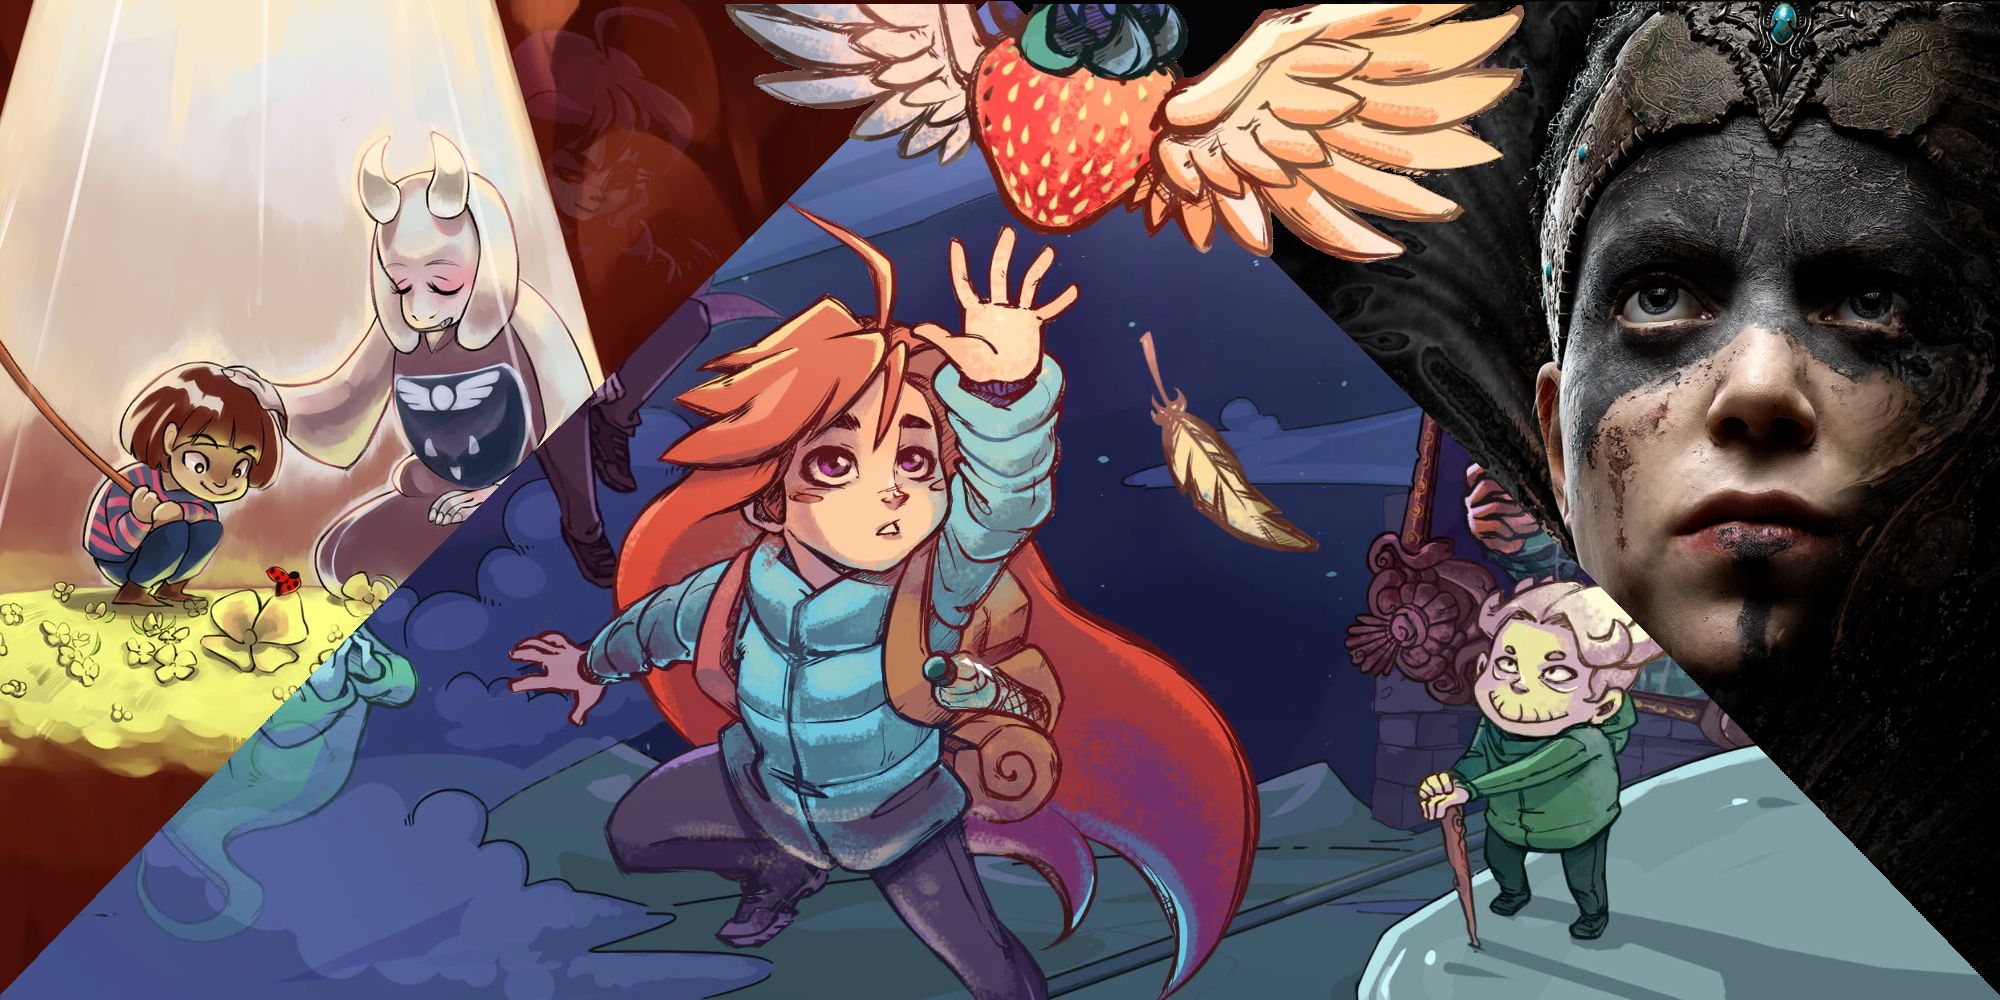 Self Affirming Games Featured Image (showing Madeline reaching out for a strawberry, Toriel comforting the Undertale protagonist, and Senua looking stoic)